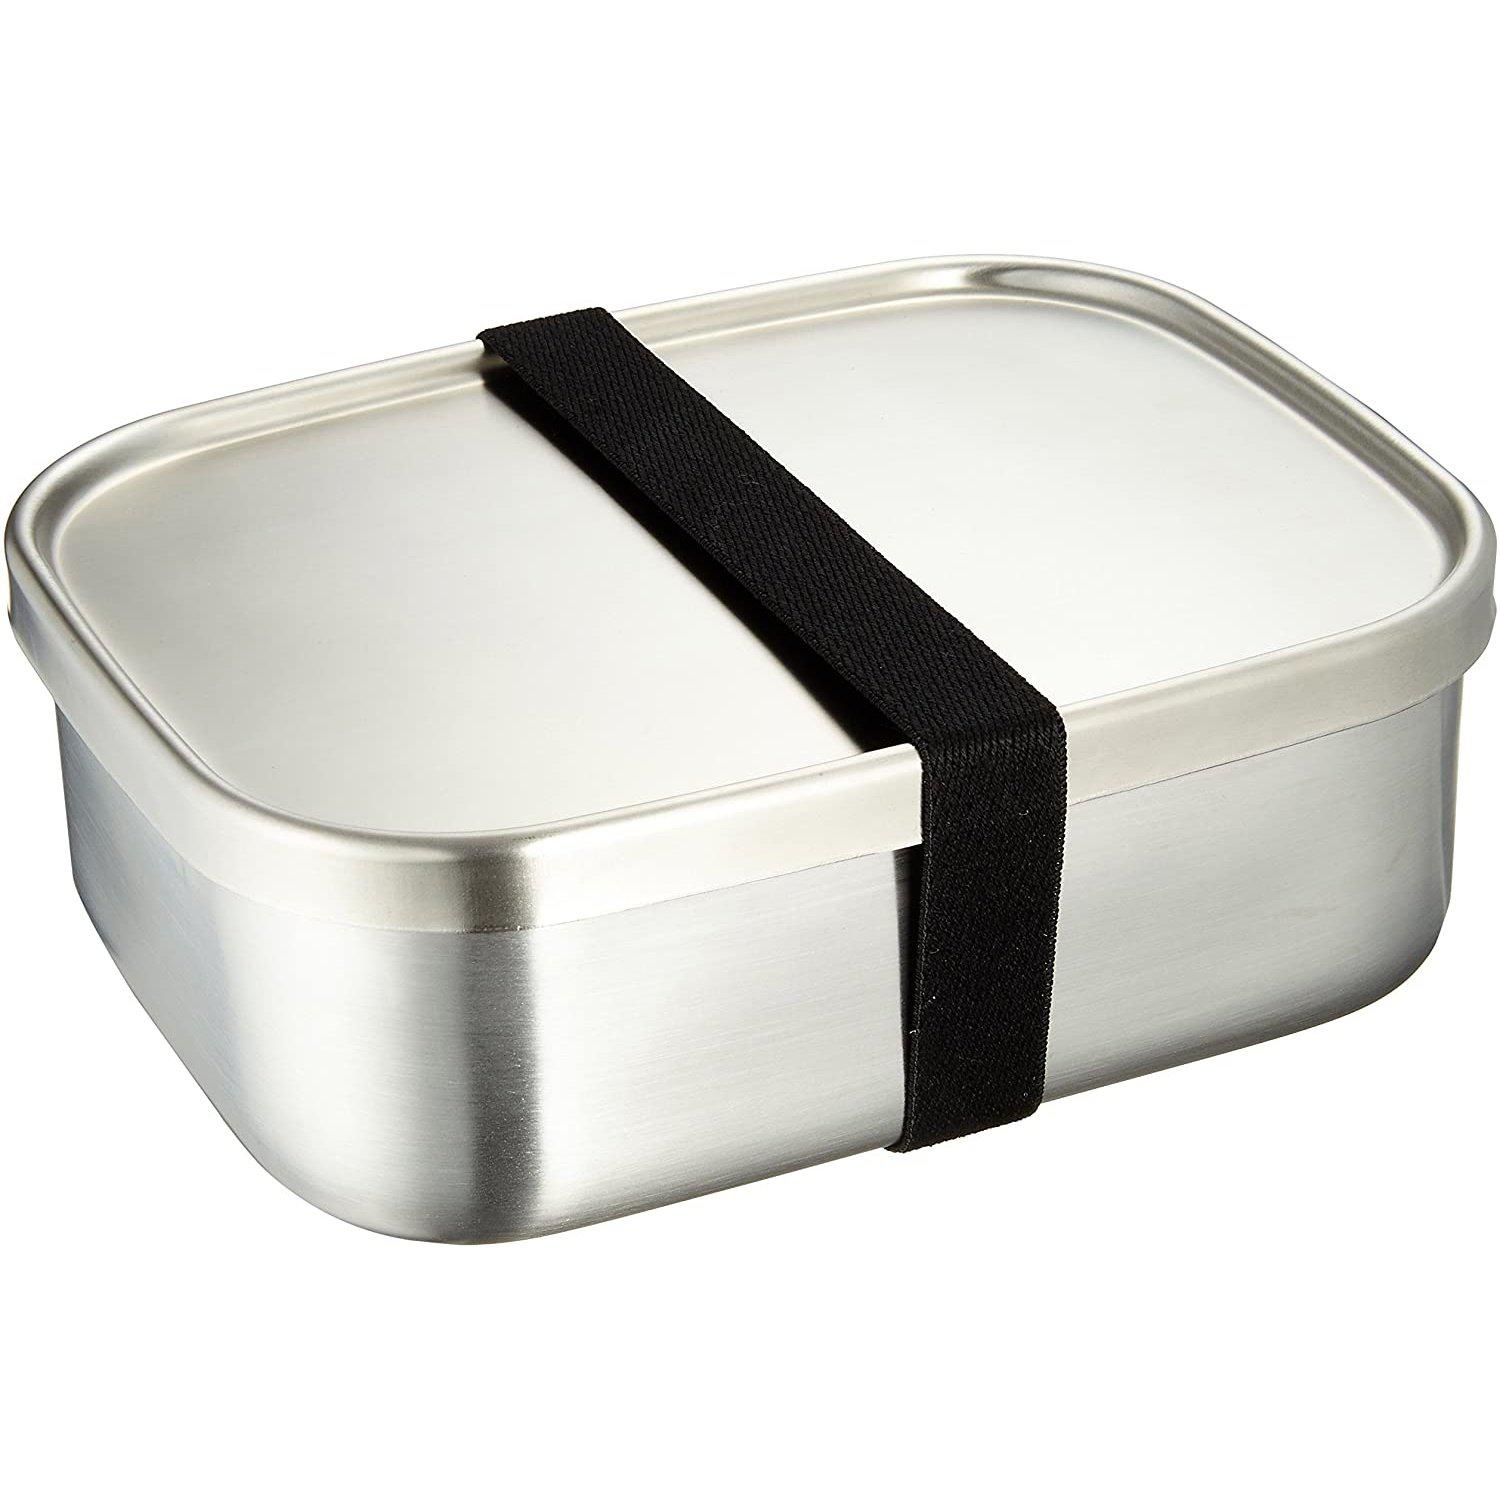 Stainless Steel Lunch Box - Premium Stainless Steel Bento Box for